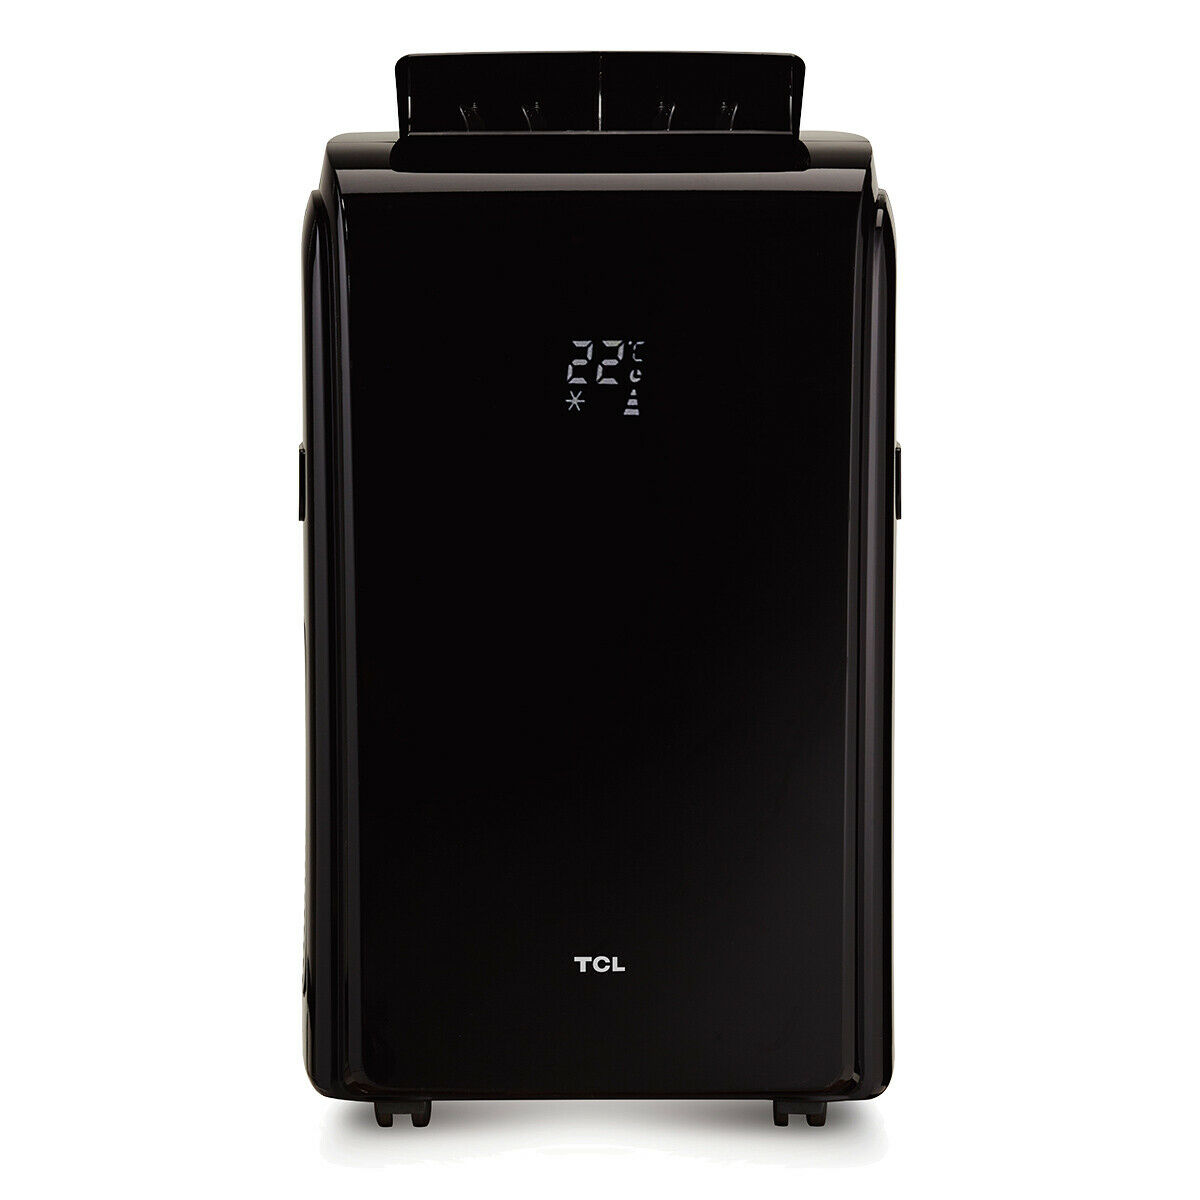 Climatizzatore mobile TCL 9000 TCL-09CPB-KB